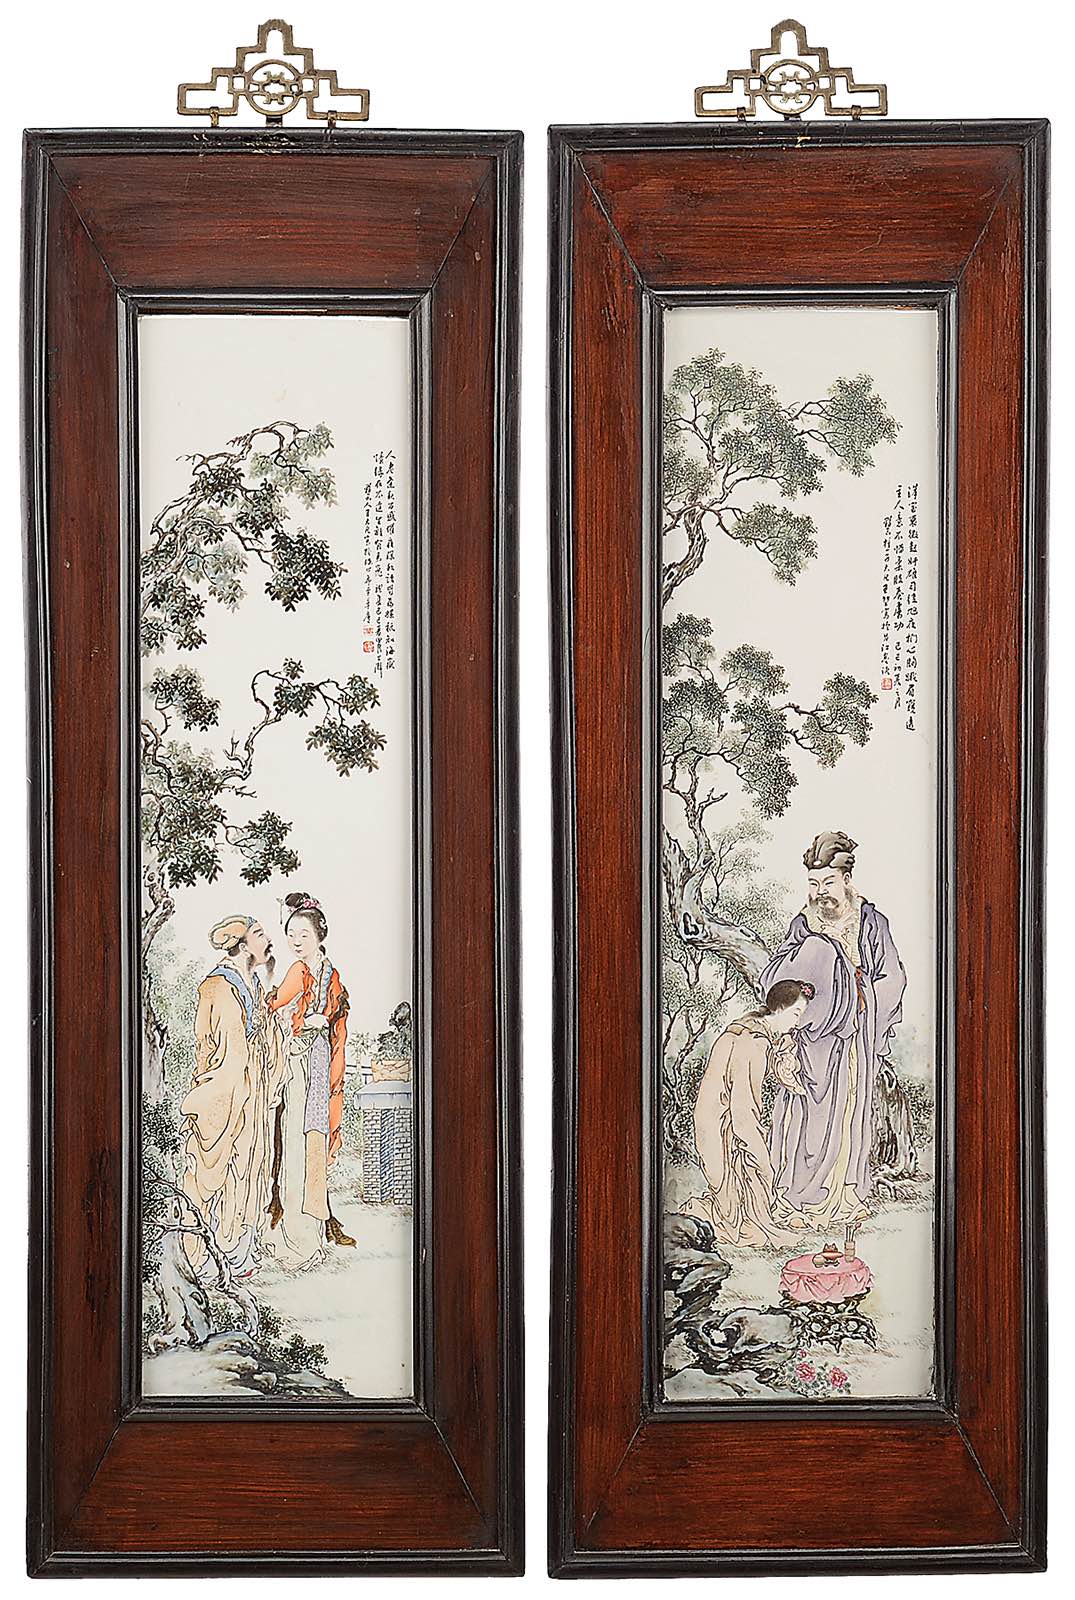 PAIR OF PORCELAIN PLAQUES BY WANG DAFAN, estimated at $30,000-40,000.